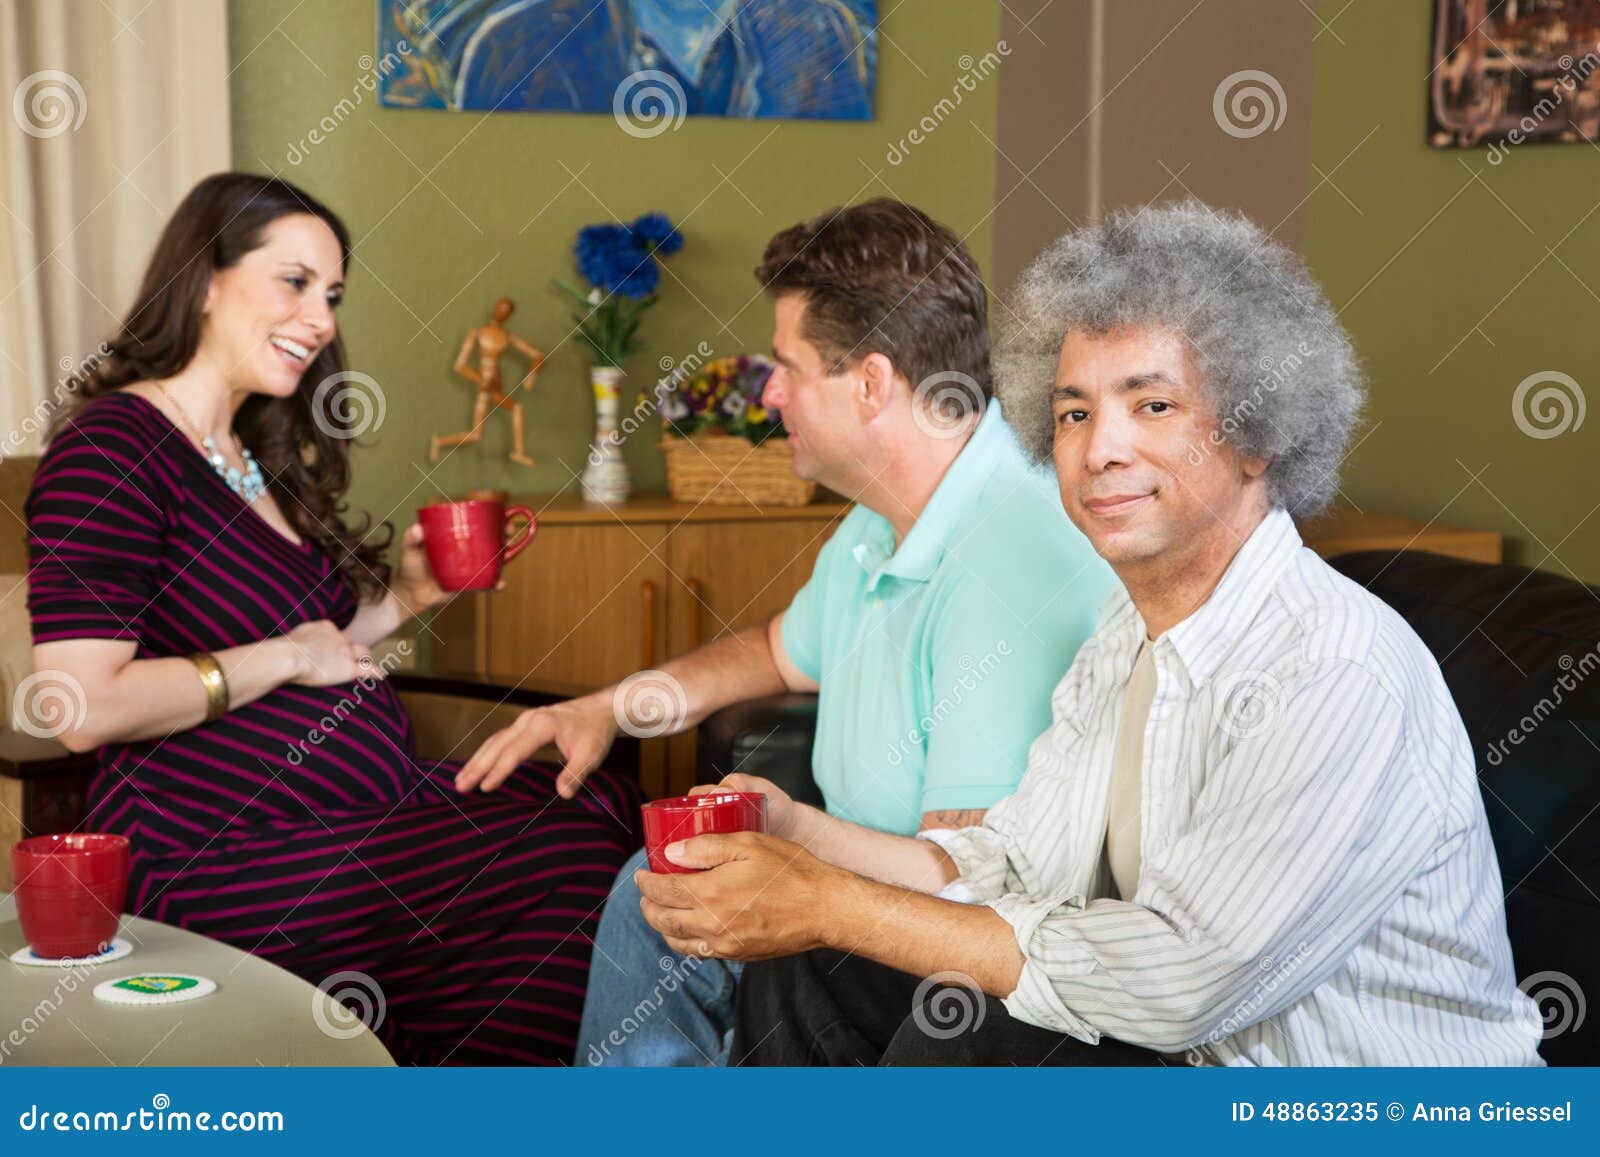 Surrogate Mother with Two Same Sex Parents Stock Image pic